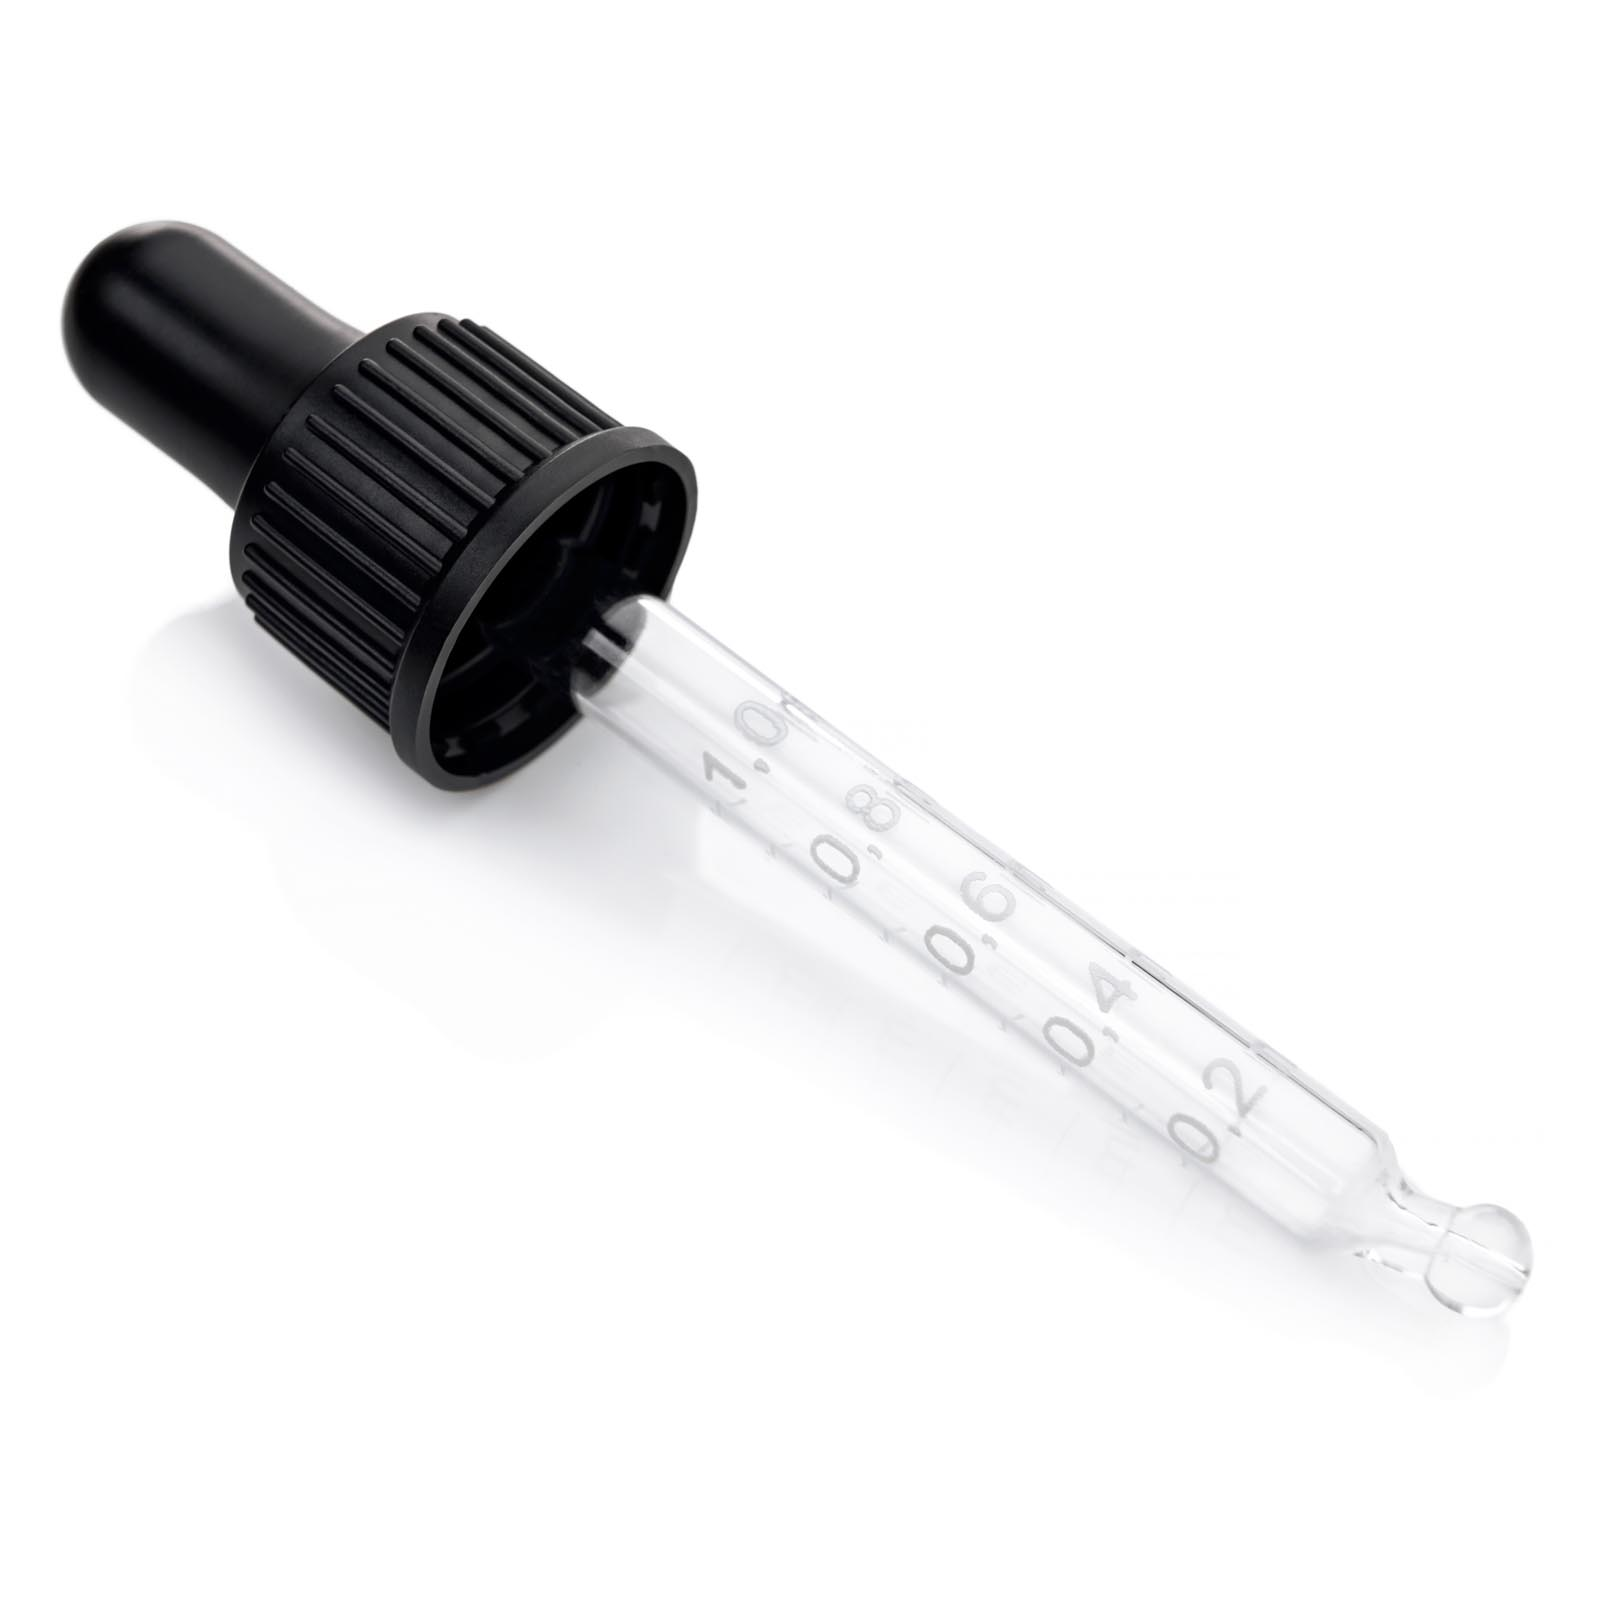 A pipette from a dropper bottle with graduated markings from 0.2 to 1.0ml